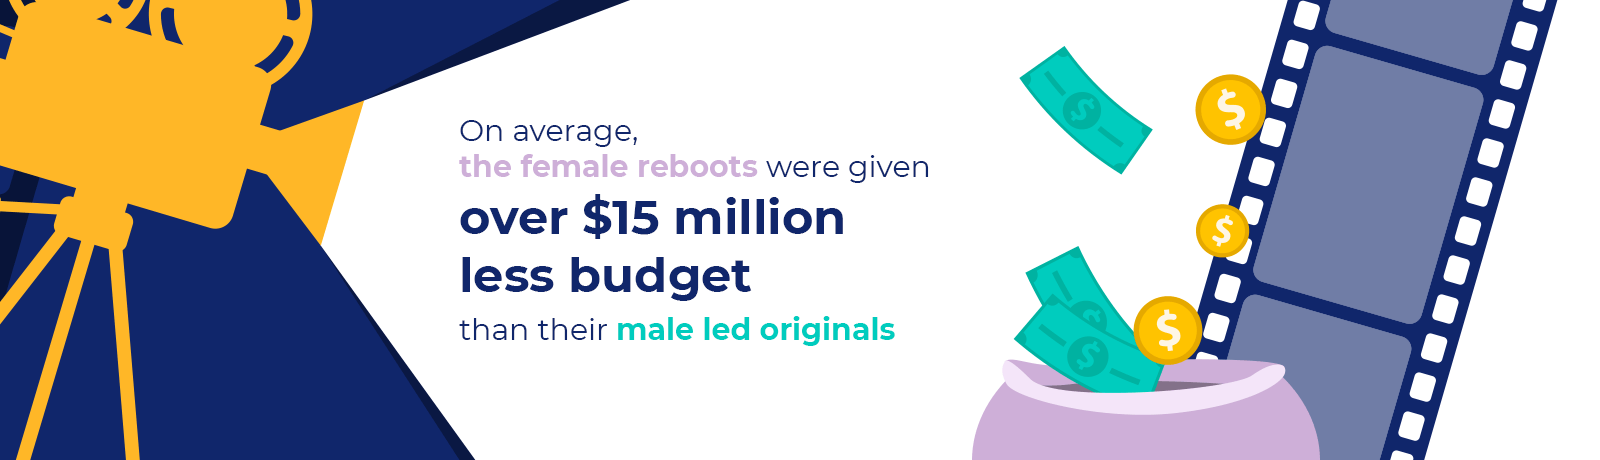 infographic - female reboots budget